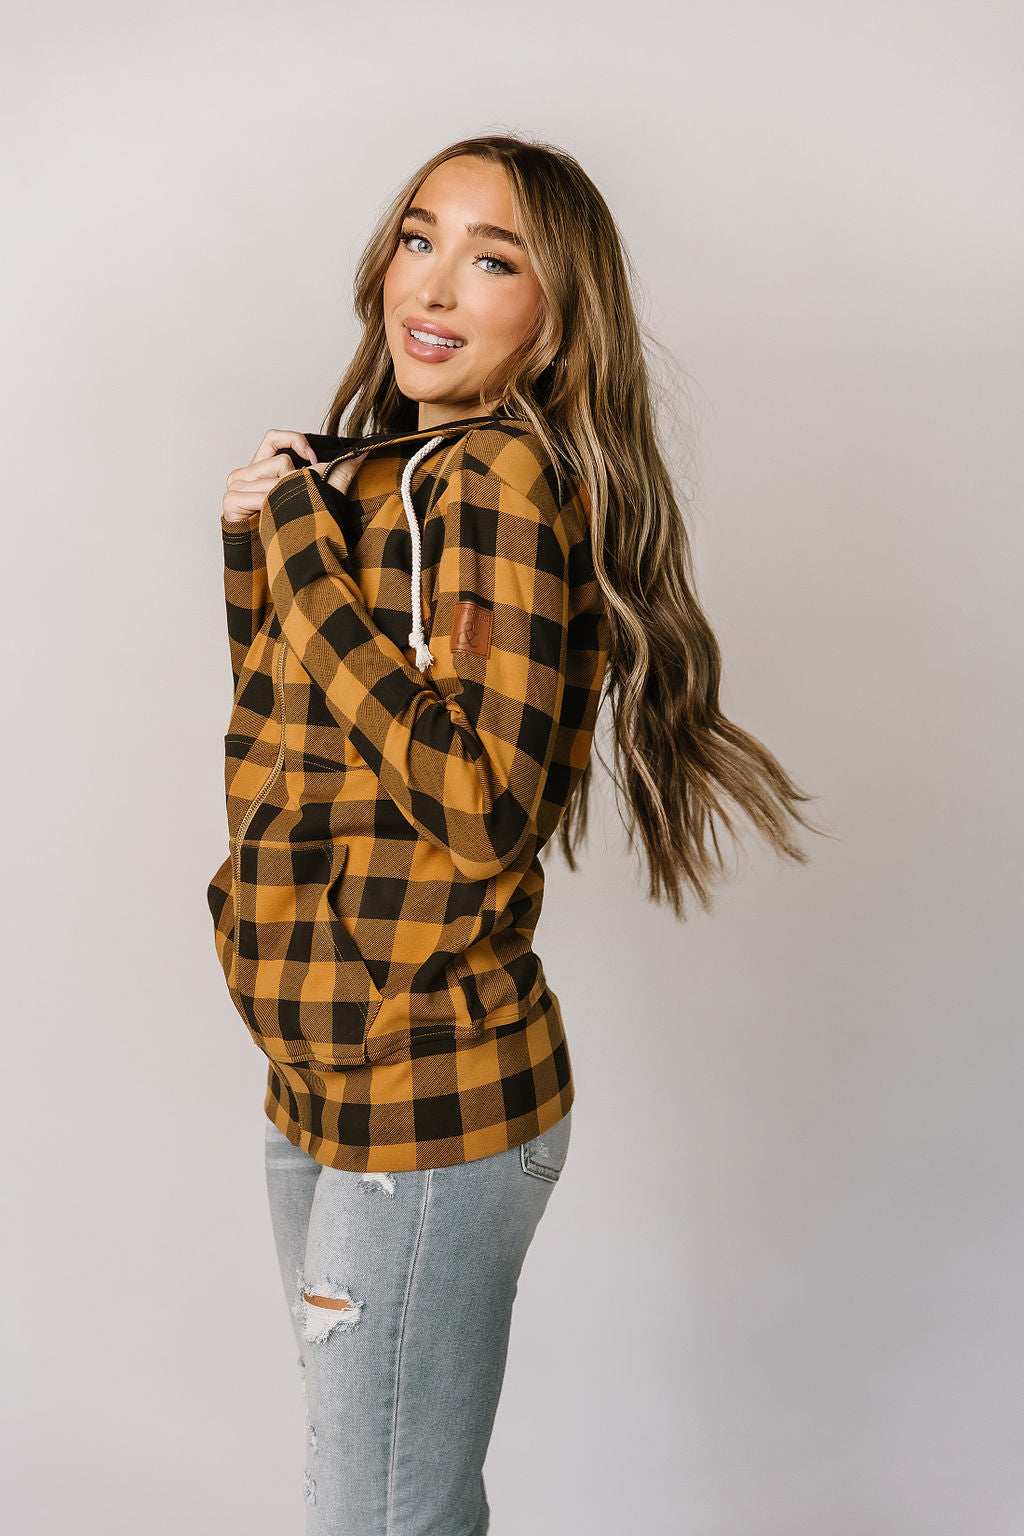 Ampersand Avenue Fullzip Sweatshirt Out of the Woods